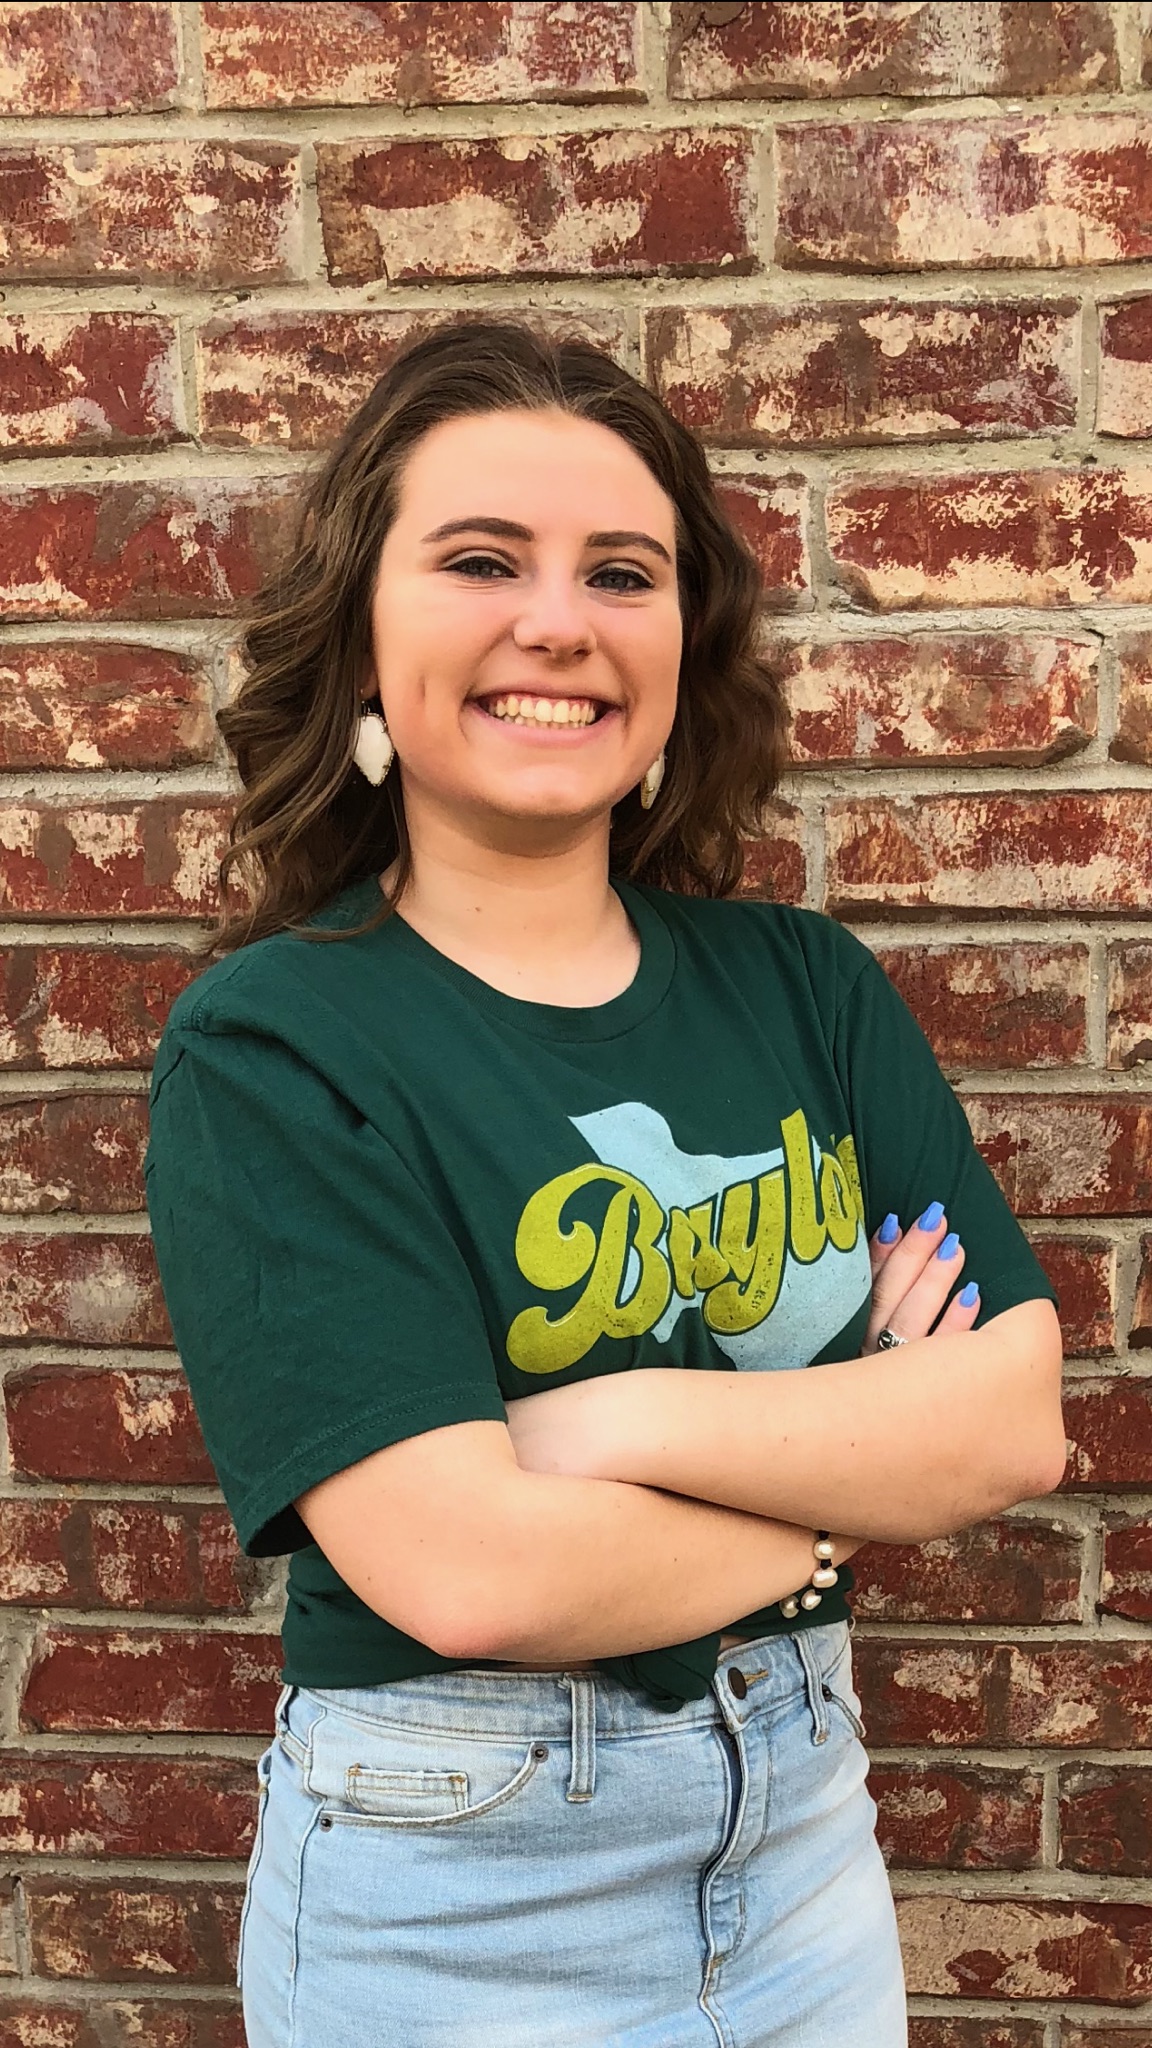 BU ’22 provides talented mix of students - The Baylor Lariat